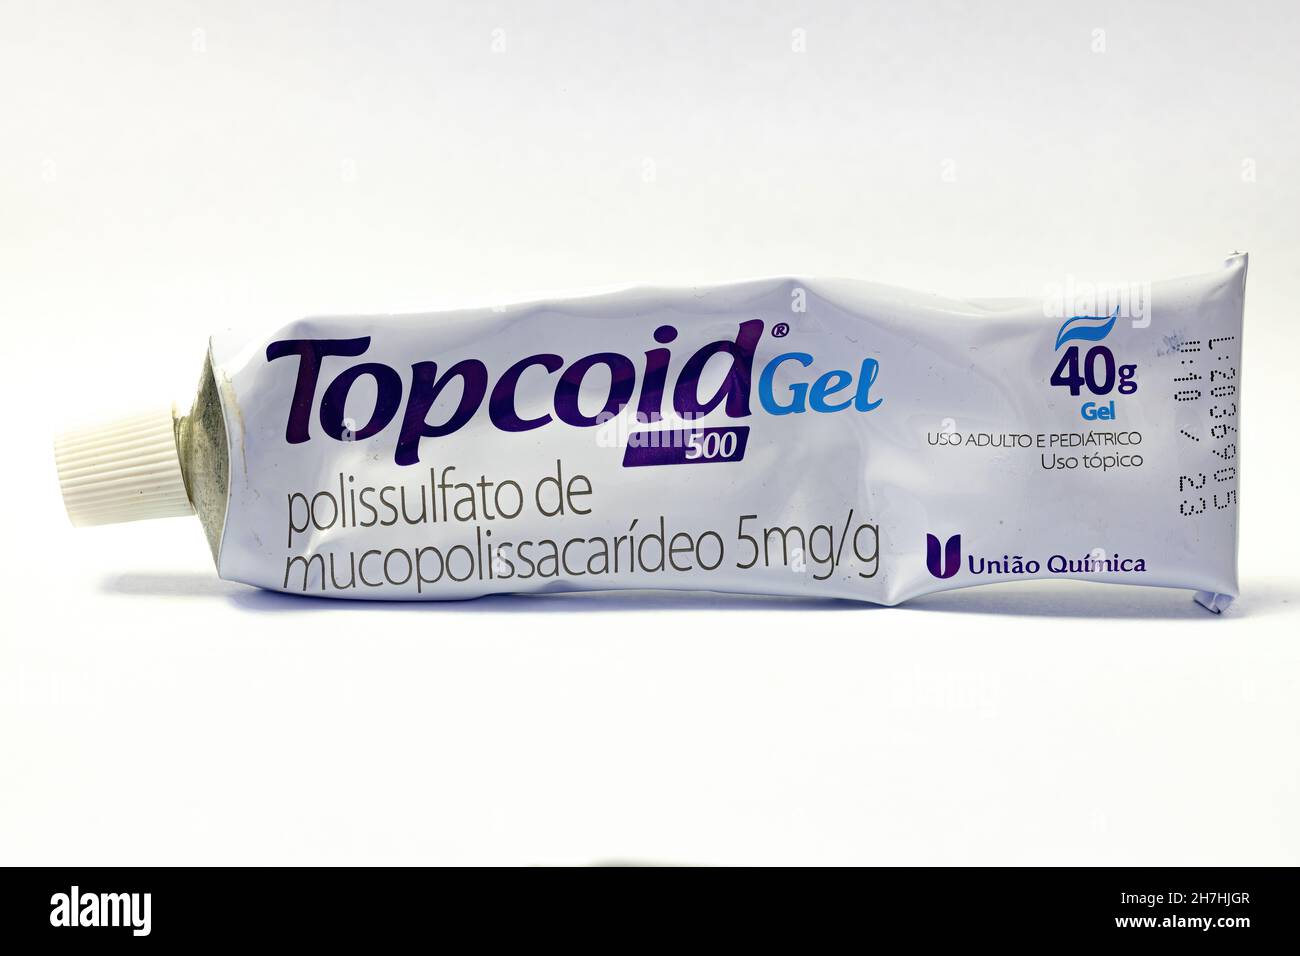 Cassilandia, Mato Grosso do Sul, Brazil - 11 20 2021: Tube in Portuguese of Topcoid ointment is used hematomas and inflammation caused by varicose vei Stock Photo